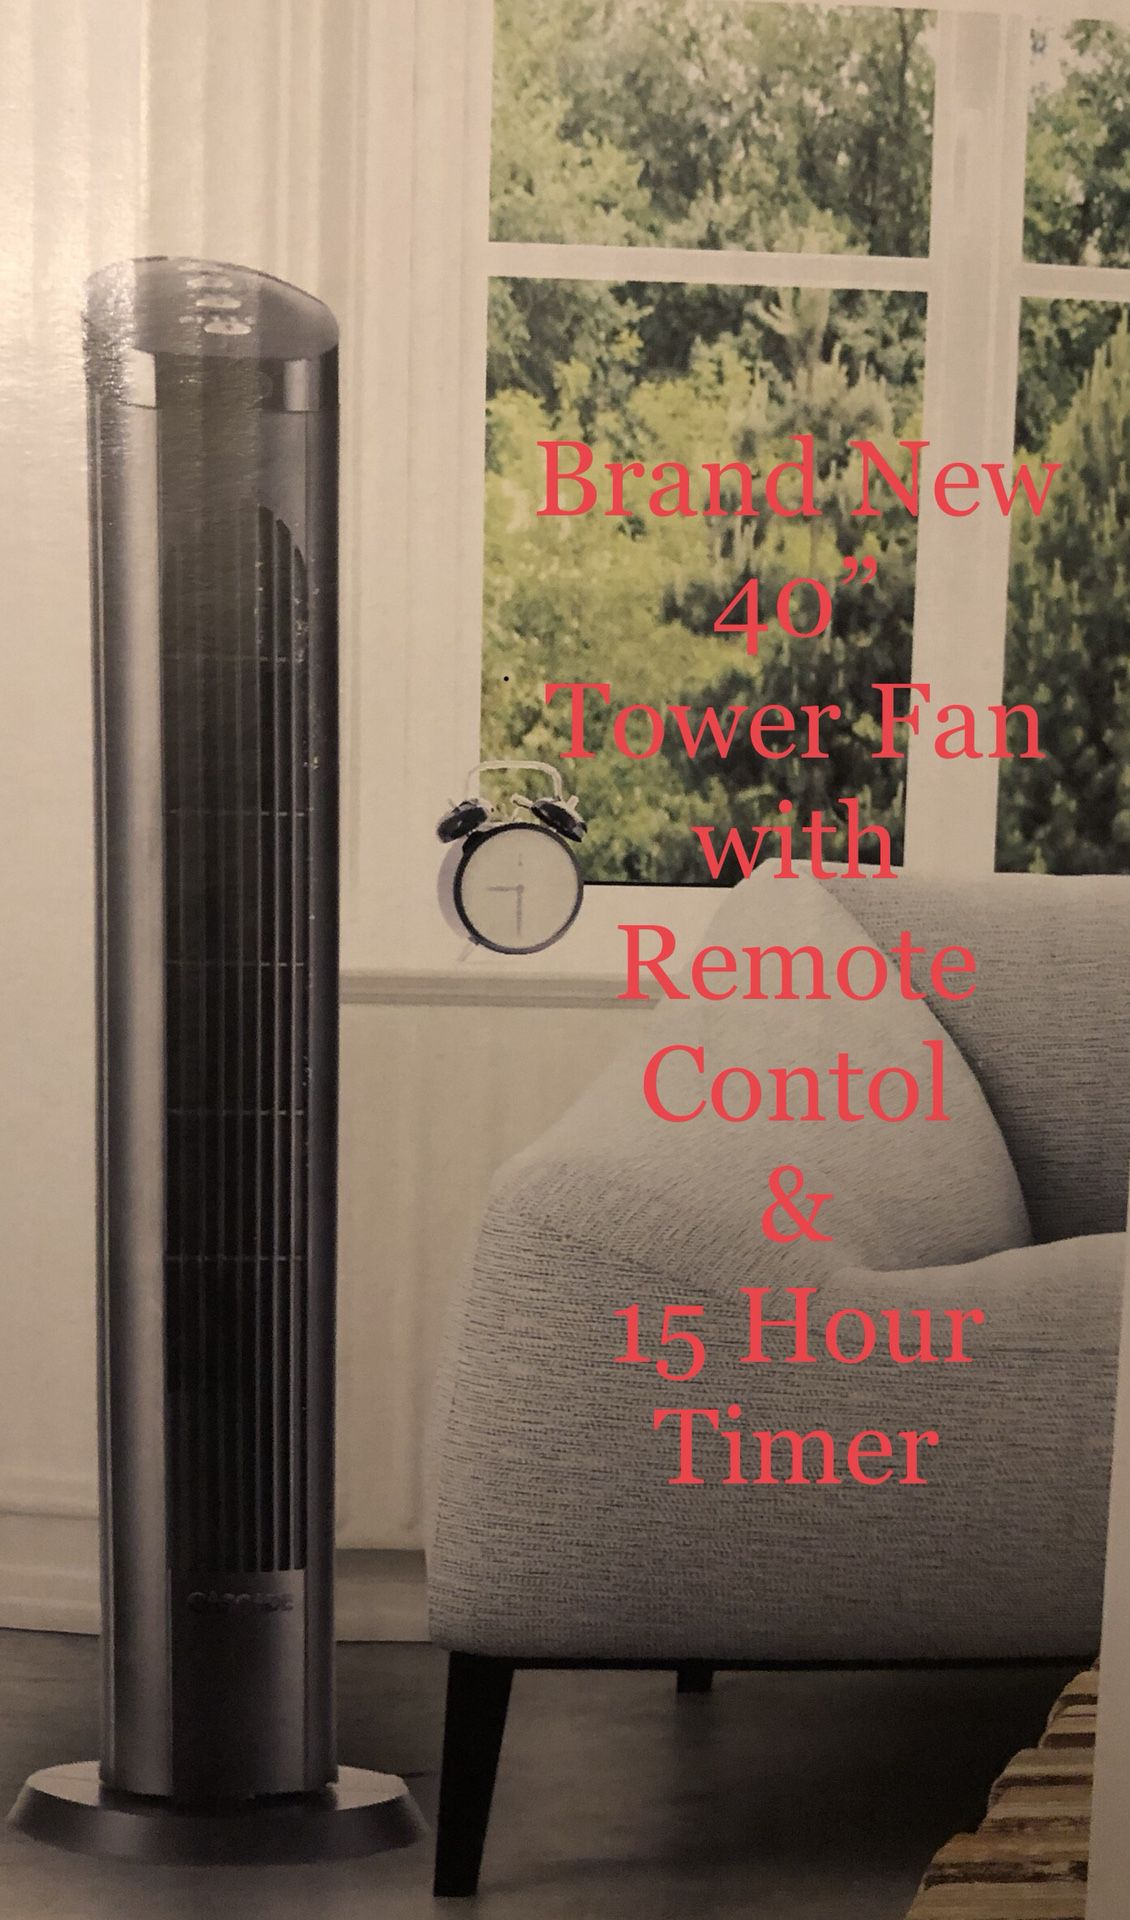 Tower Fan 📍 Remote Control 📍 15 hour Timer Auto Shut Off 📍 Brand New in Box📍$40 each Firm price